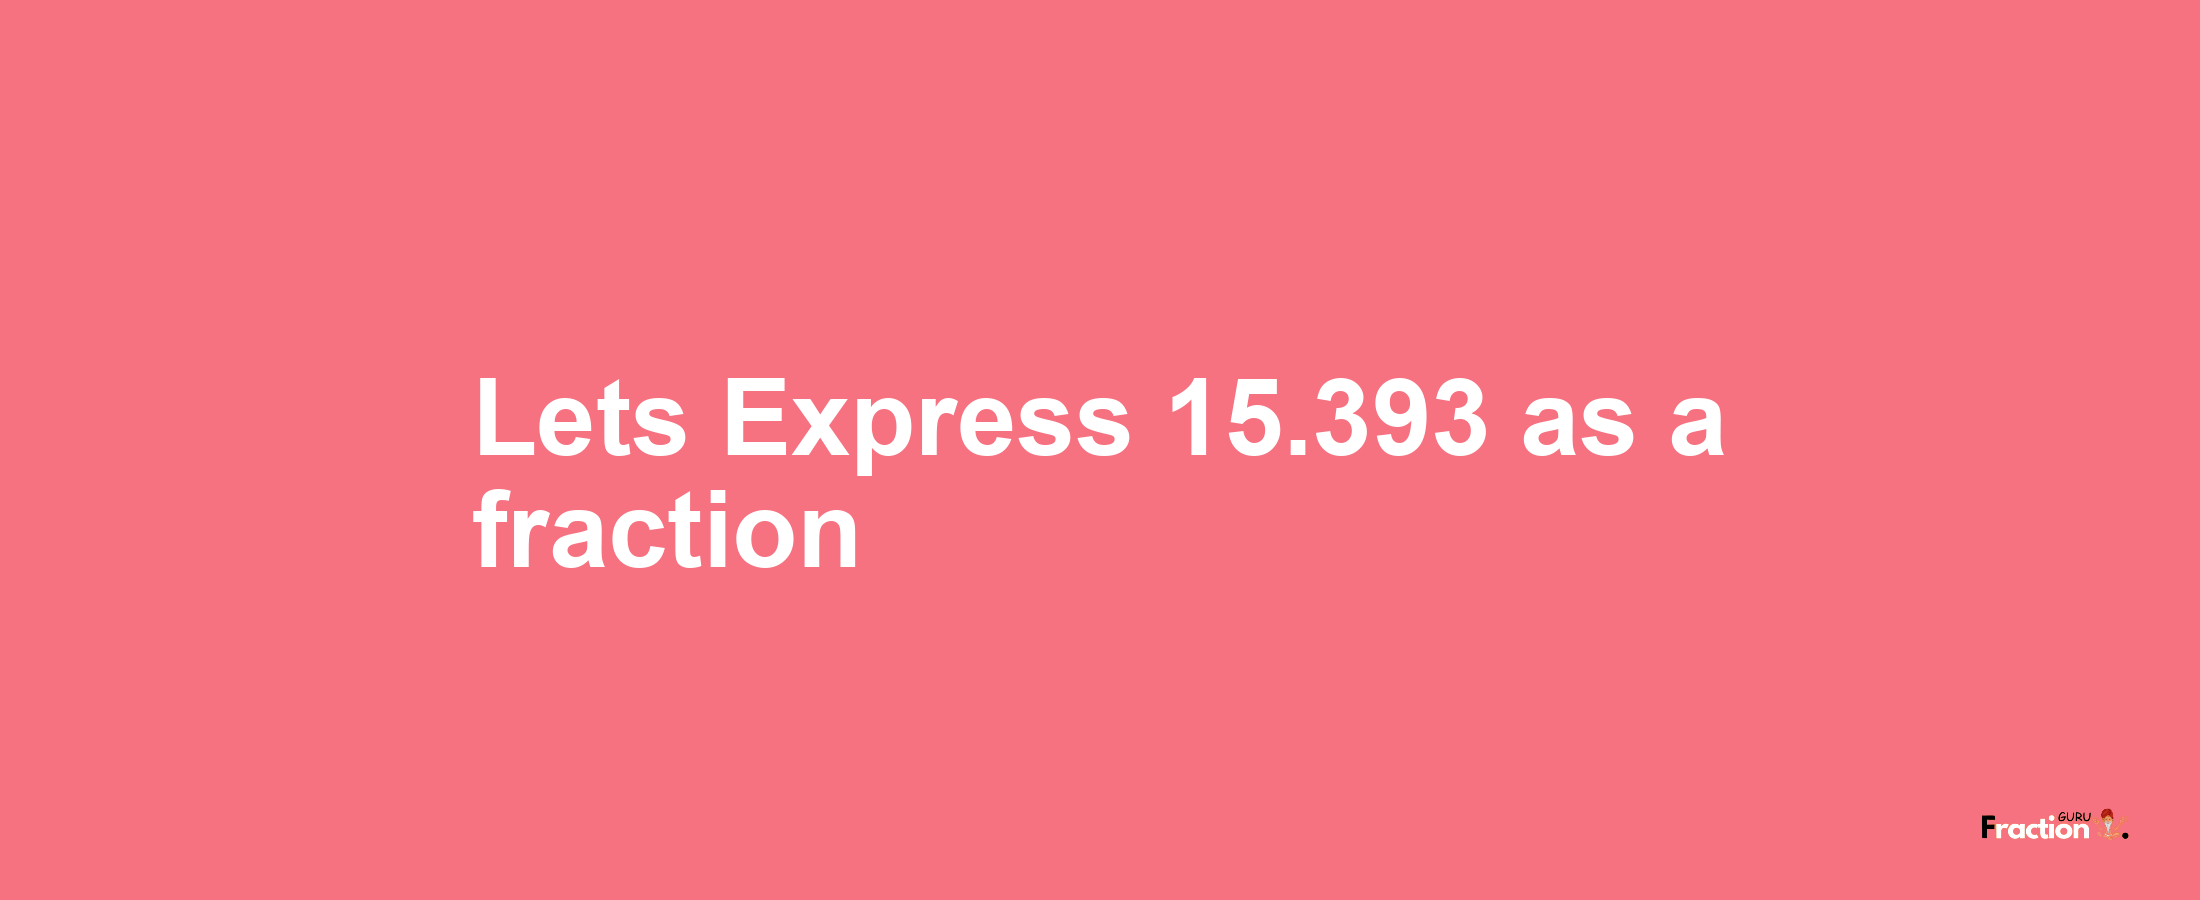 Lets Express 15.393 as afraction